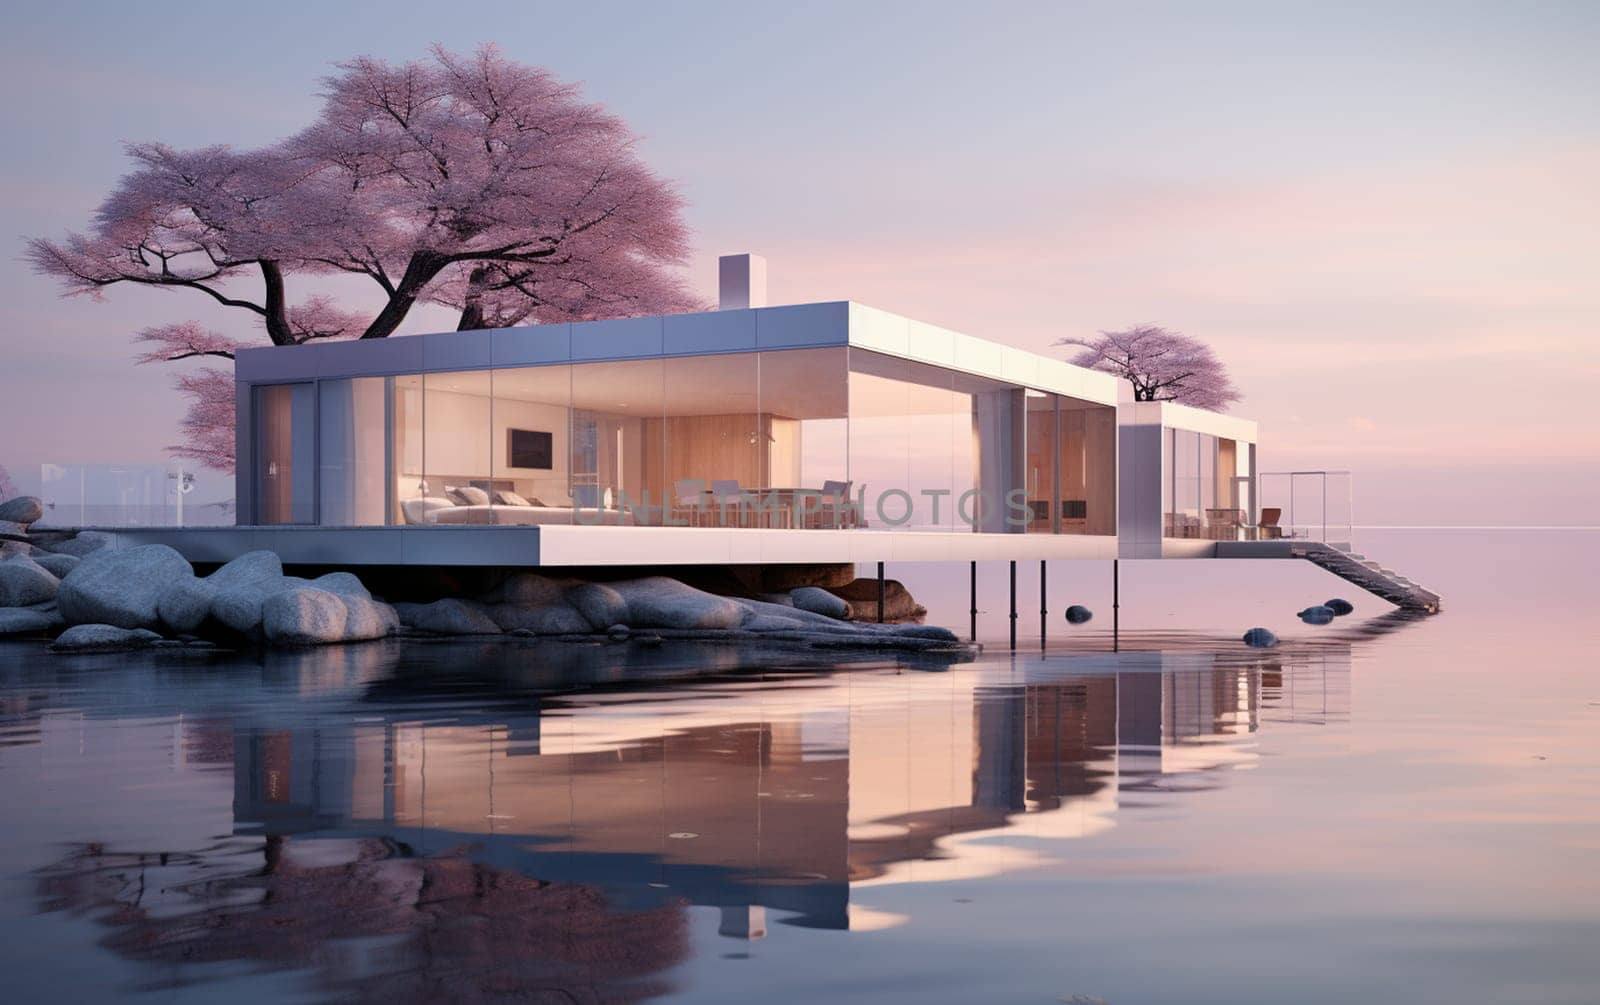 3D rendering of a contemporary house by the water by Andelov13